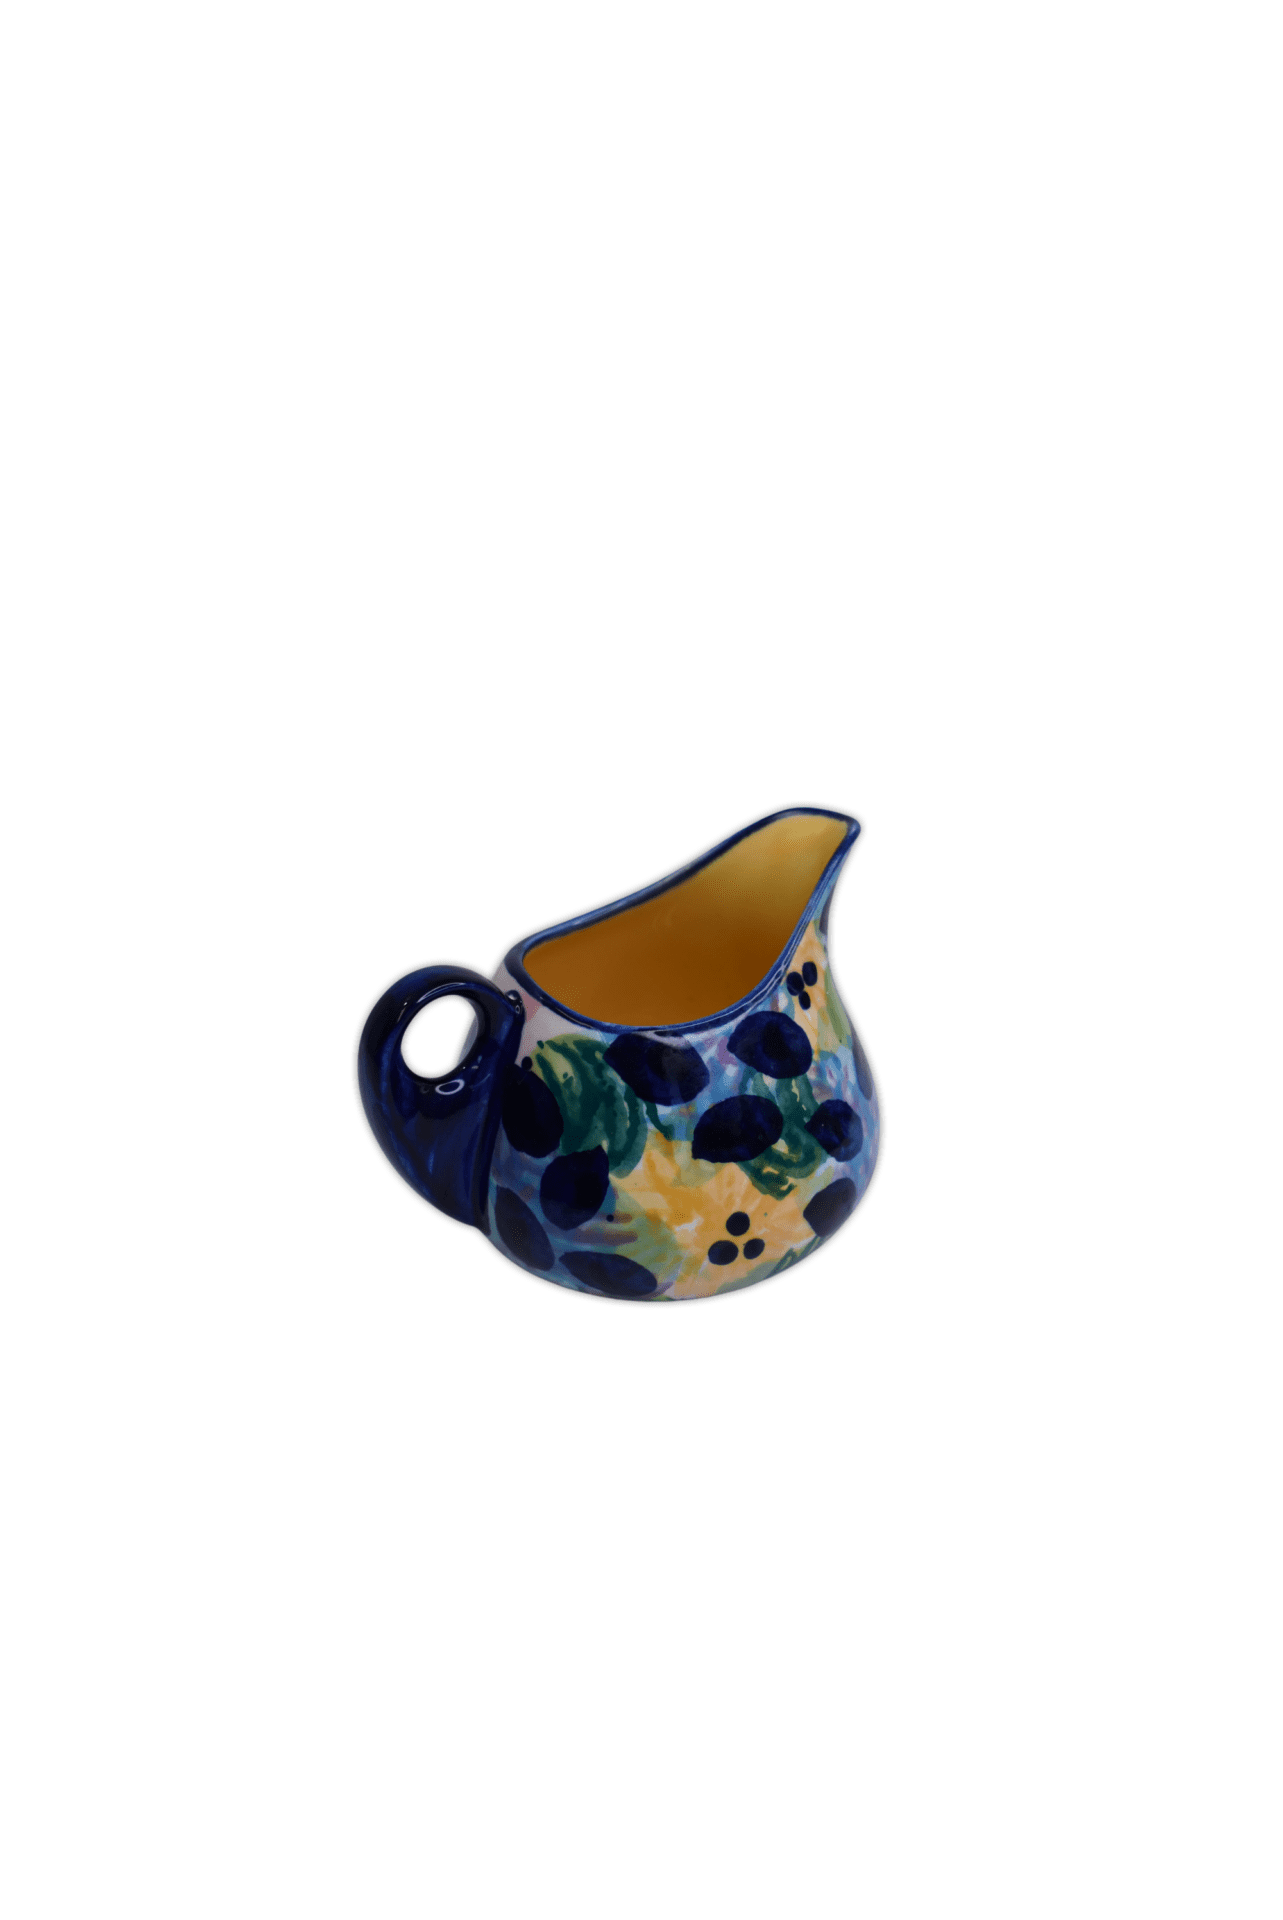 Small gravy jug for your home featuring a multicoloured floral glaze and yellow inside.